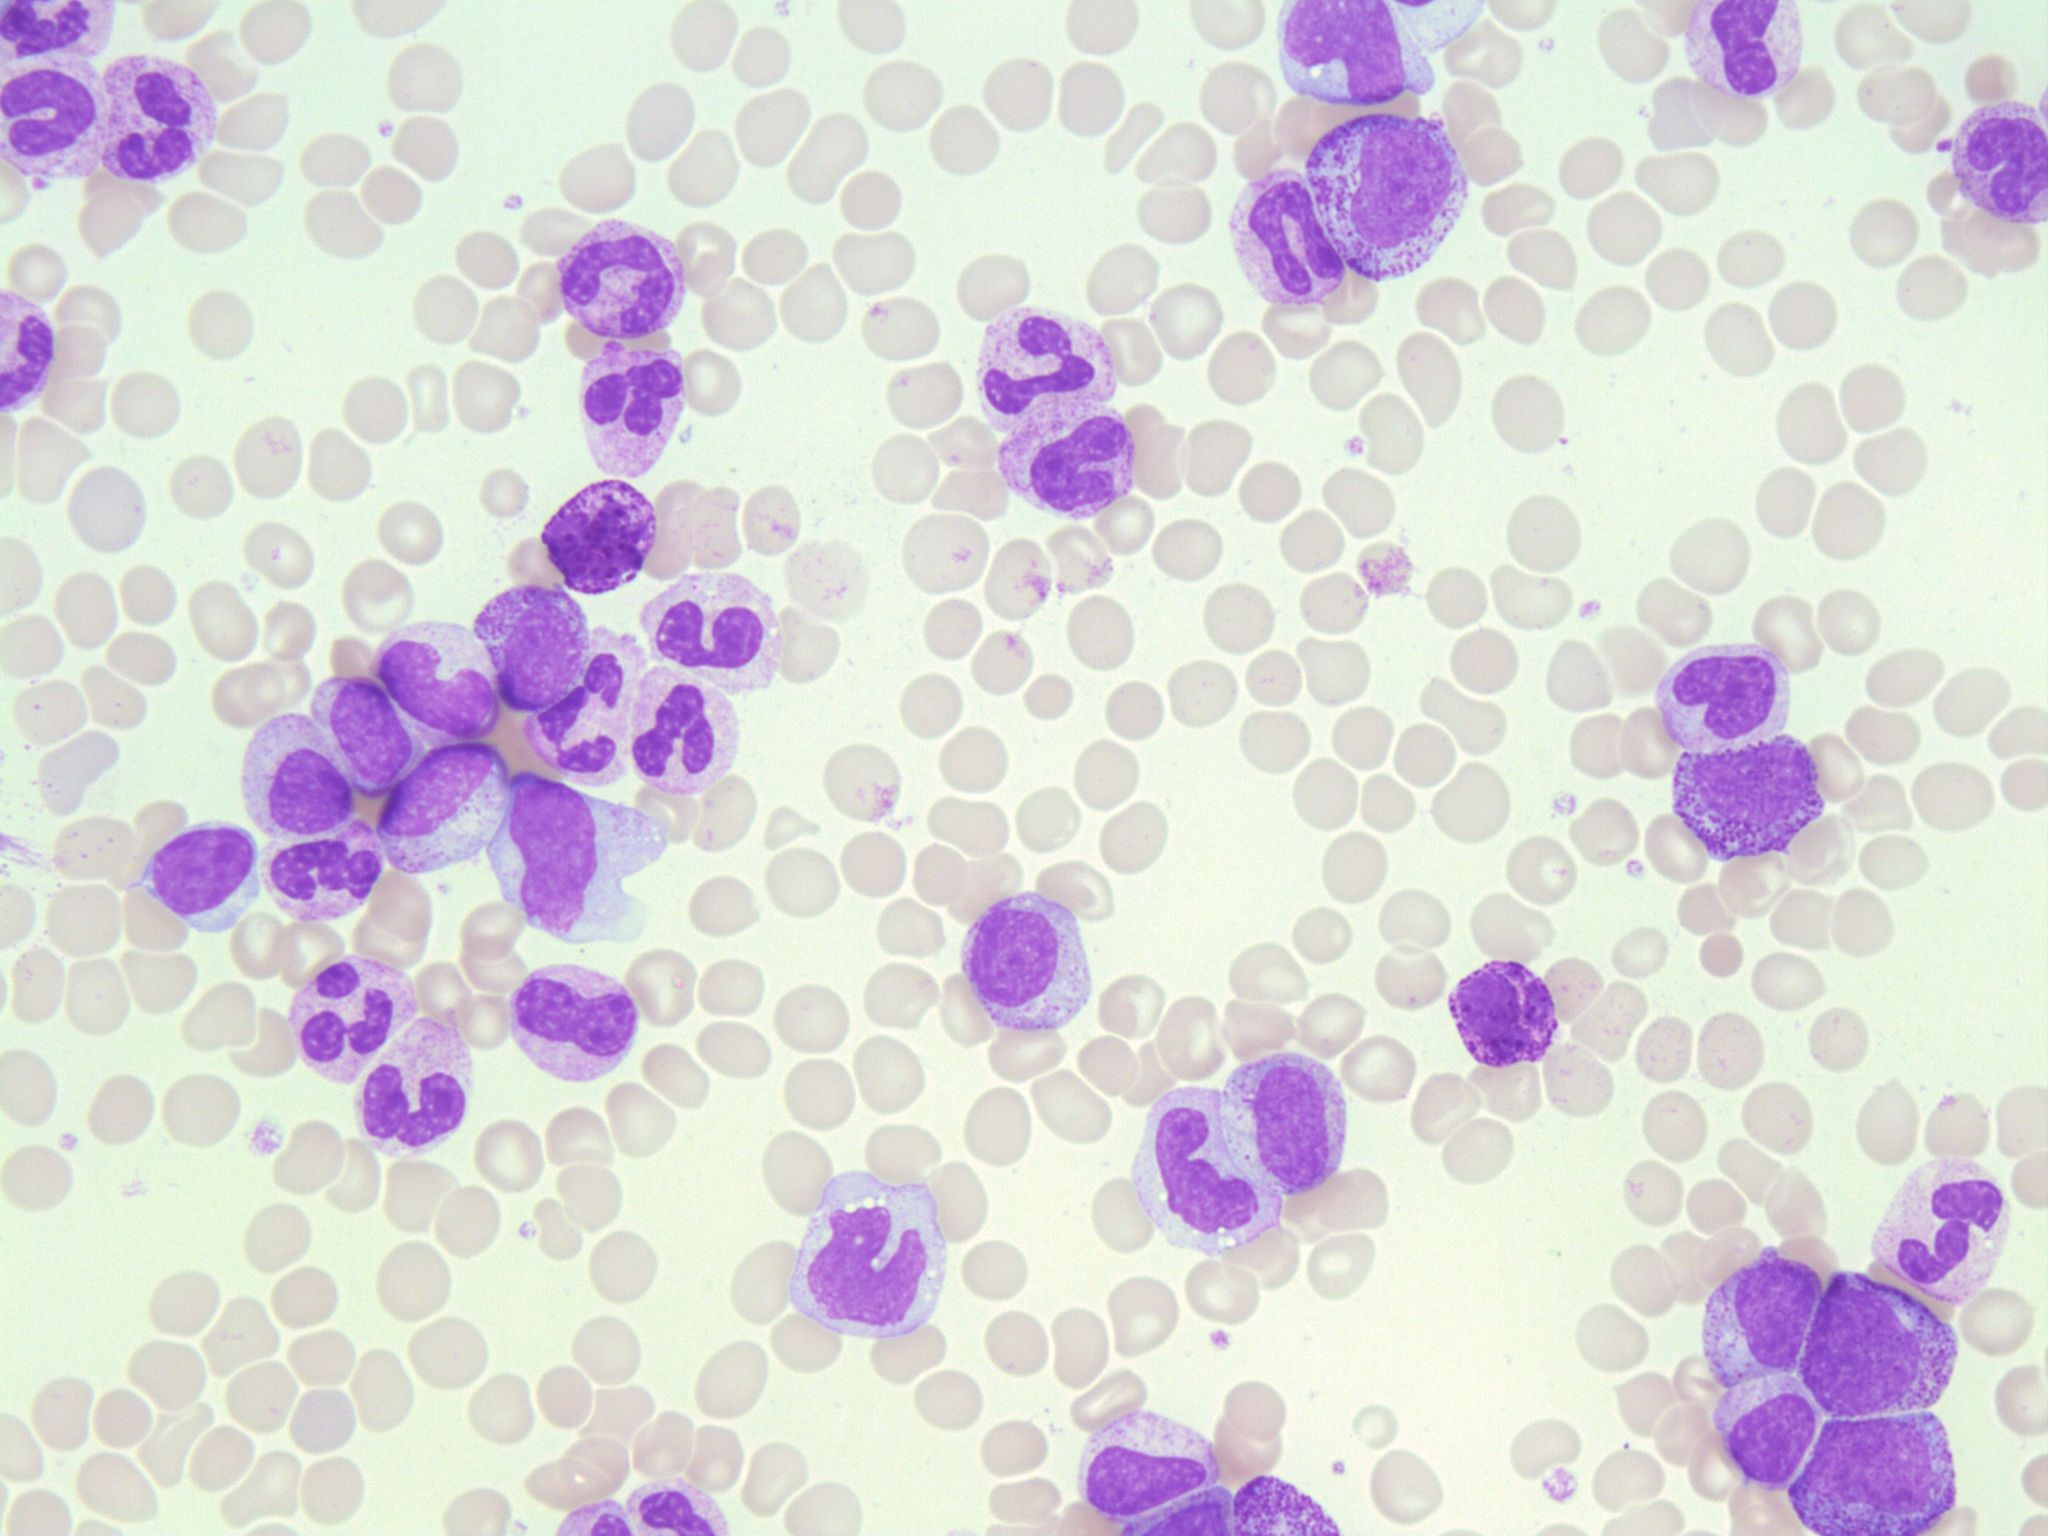 Normal mature neutrophilic granulocyte in peripheral blood smear